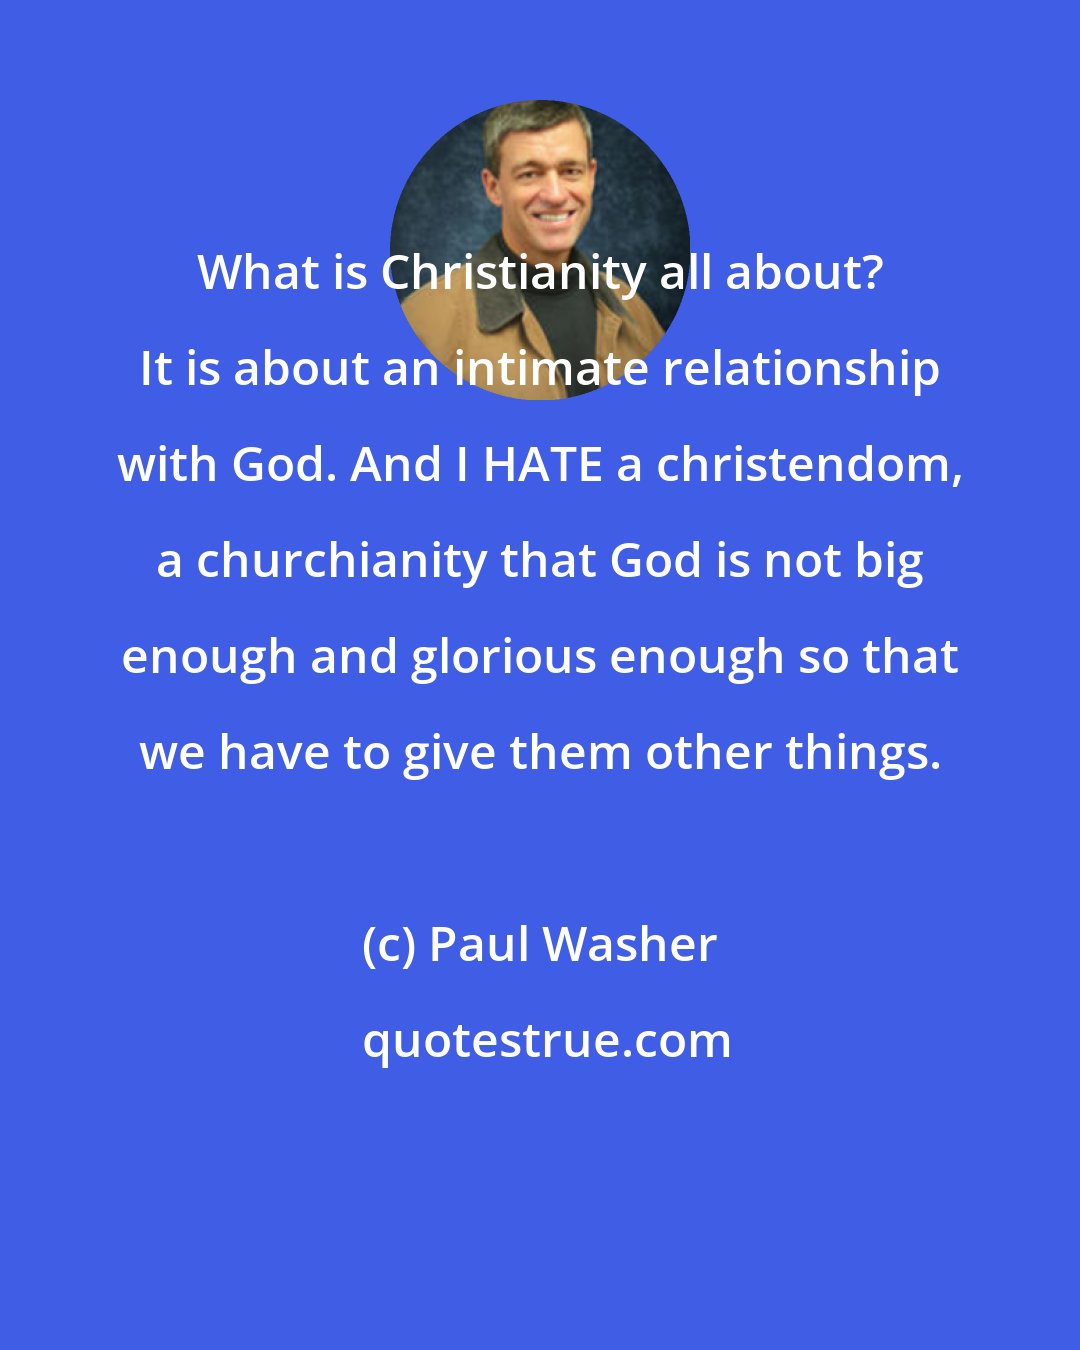 Paul Washer: What is Christianity all about? It is about an intimate relationship with God. And I HATE a christendom, a churchianity that God is not big enough and glorious enough so that we have to give them other things.